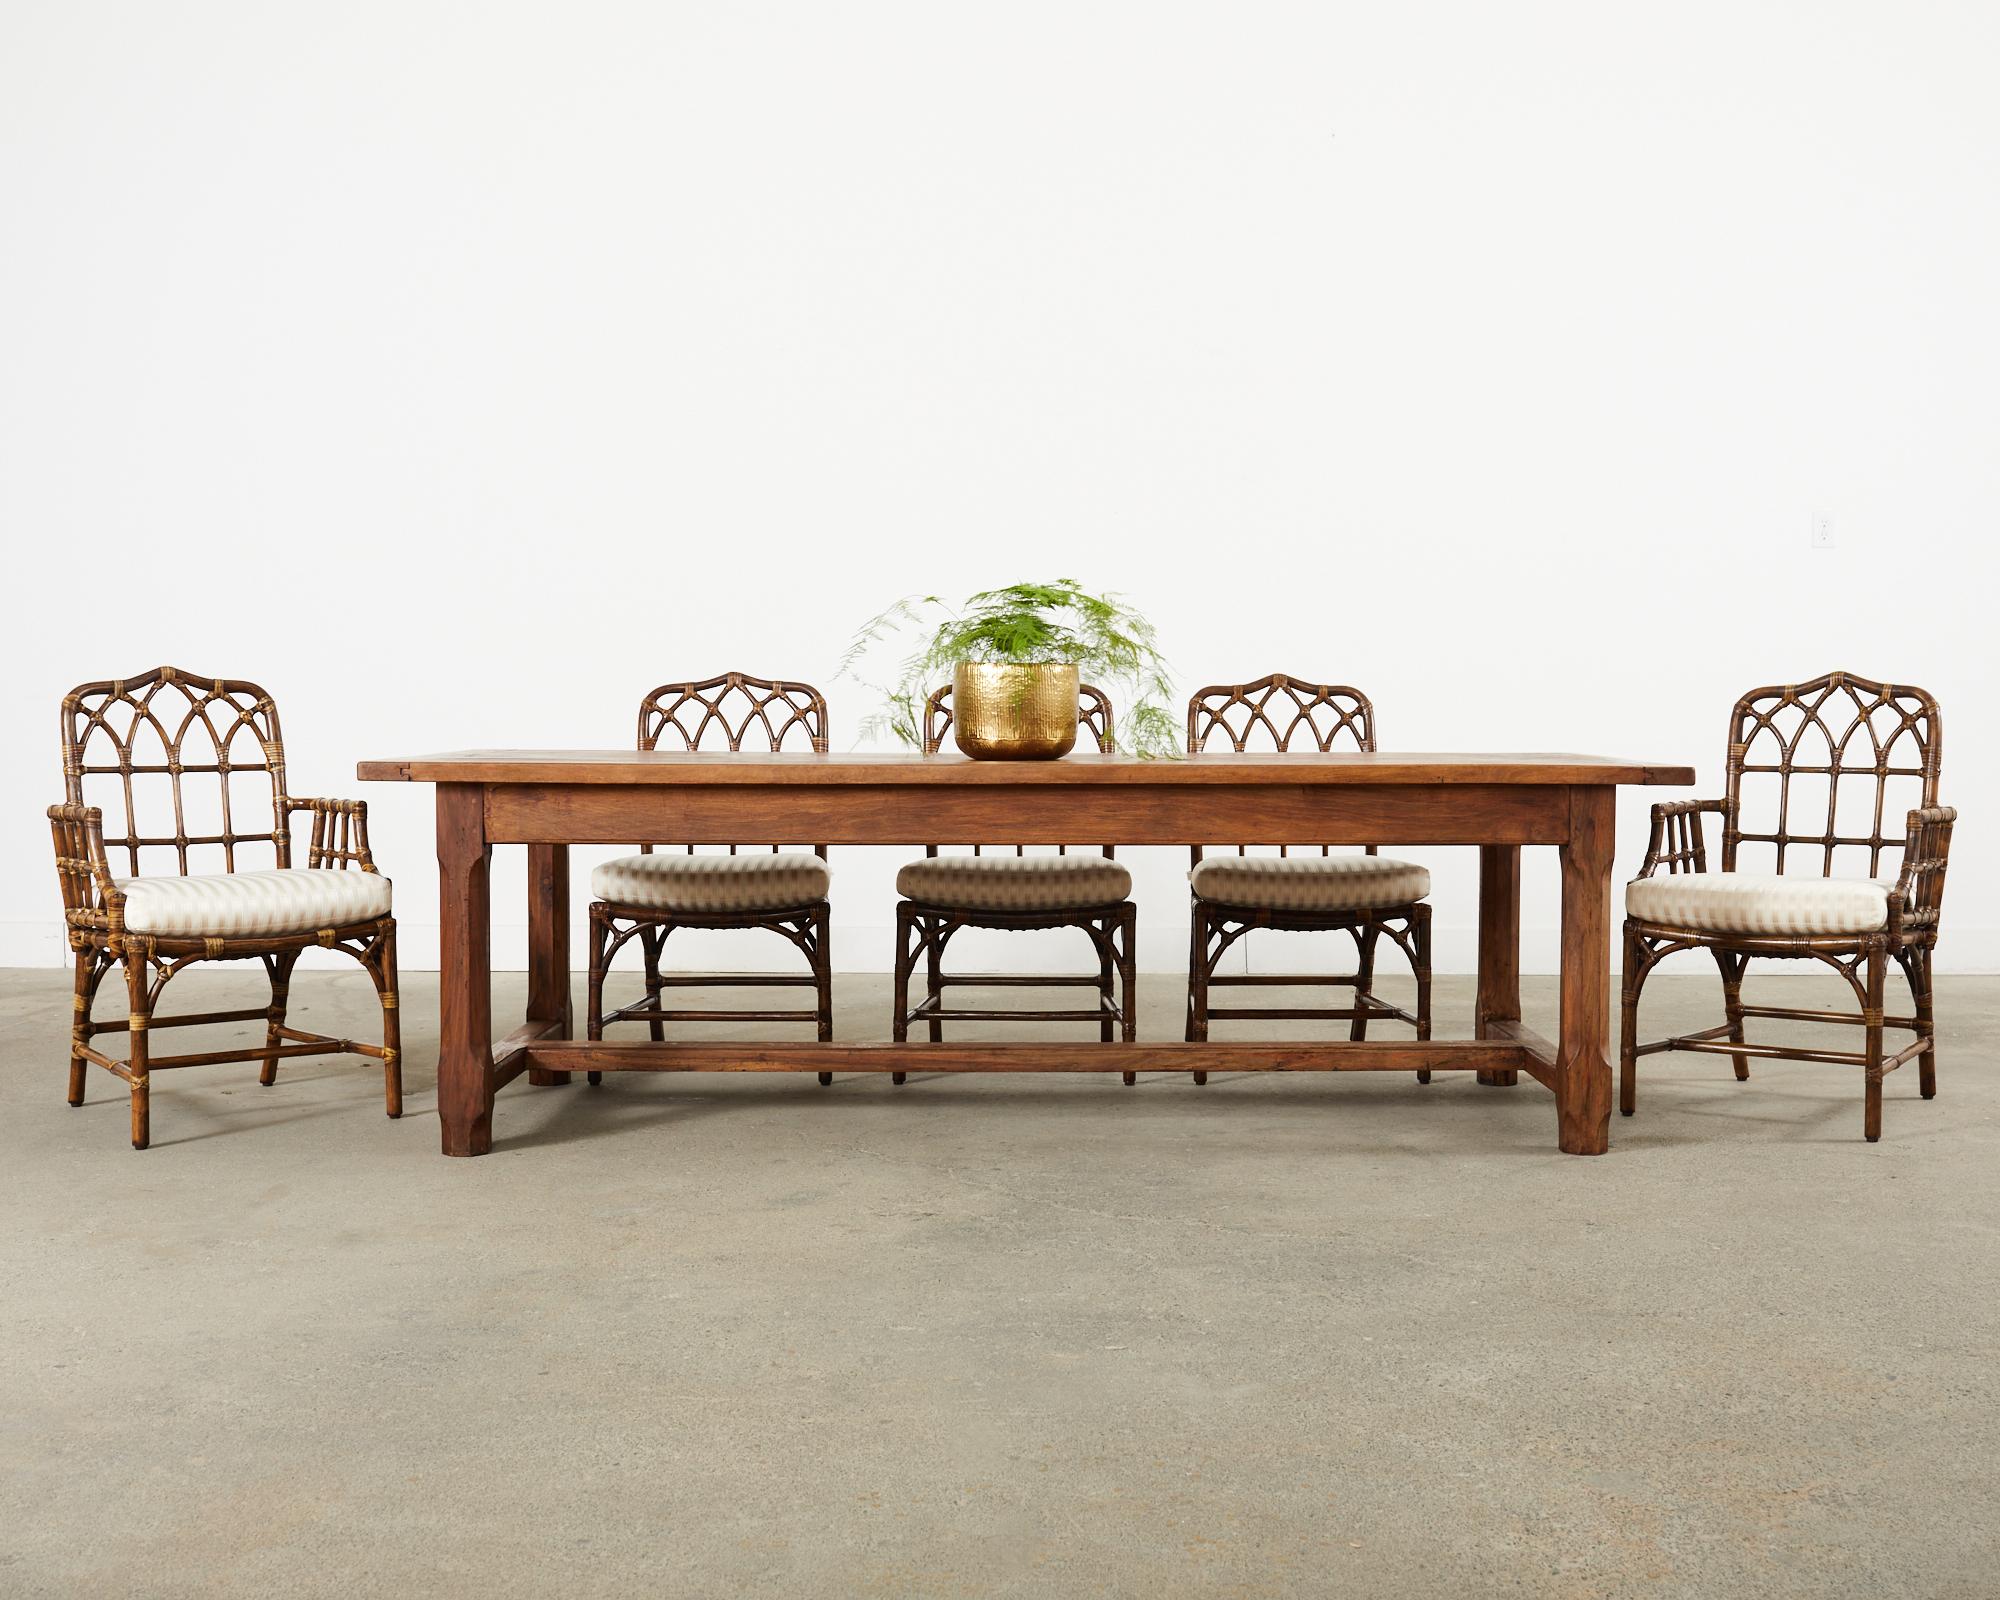 Classic country French provincial 19th century farmhouse dining table or harvest table crafted from fruitwood. The table features a massive 1.5 inch thick plank top over 8 feet long with bread board ends. The top is supported by a trestle base with